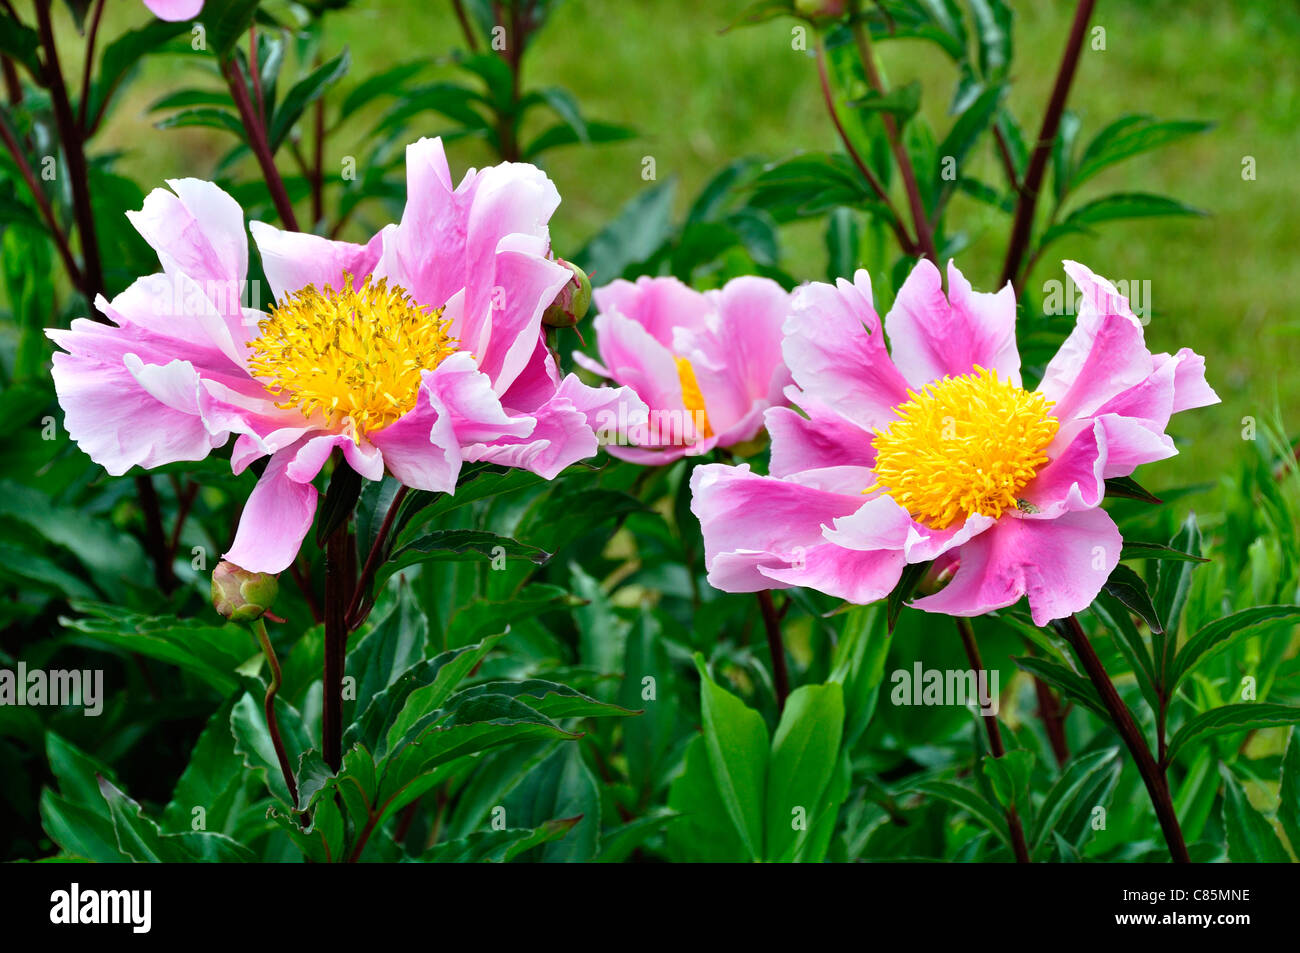 Clump of a peony (Paeonia officinalis). Stock Photo